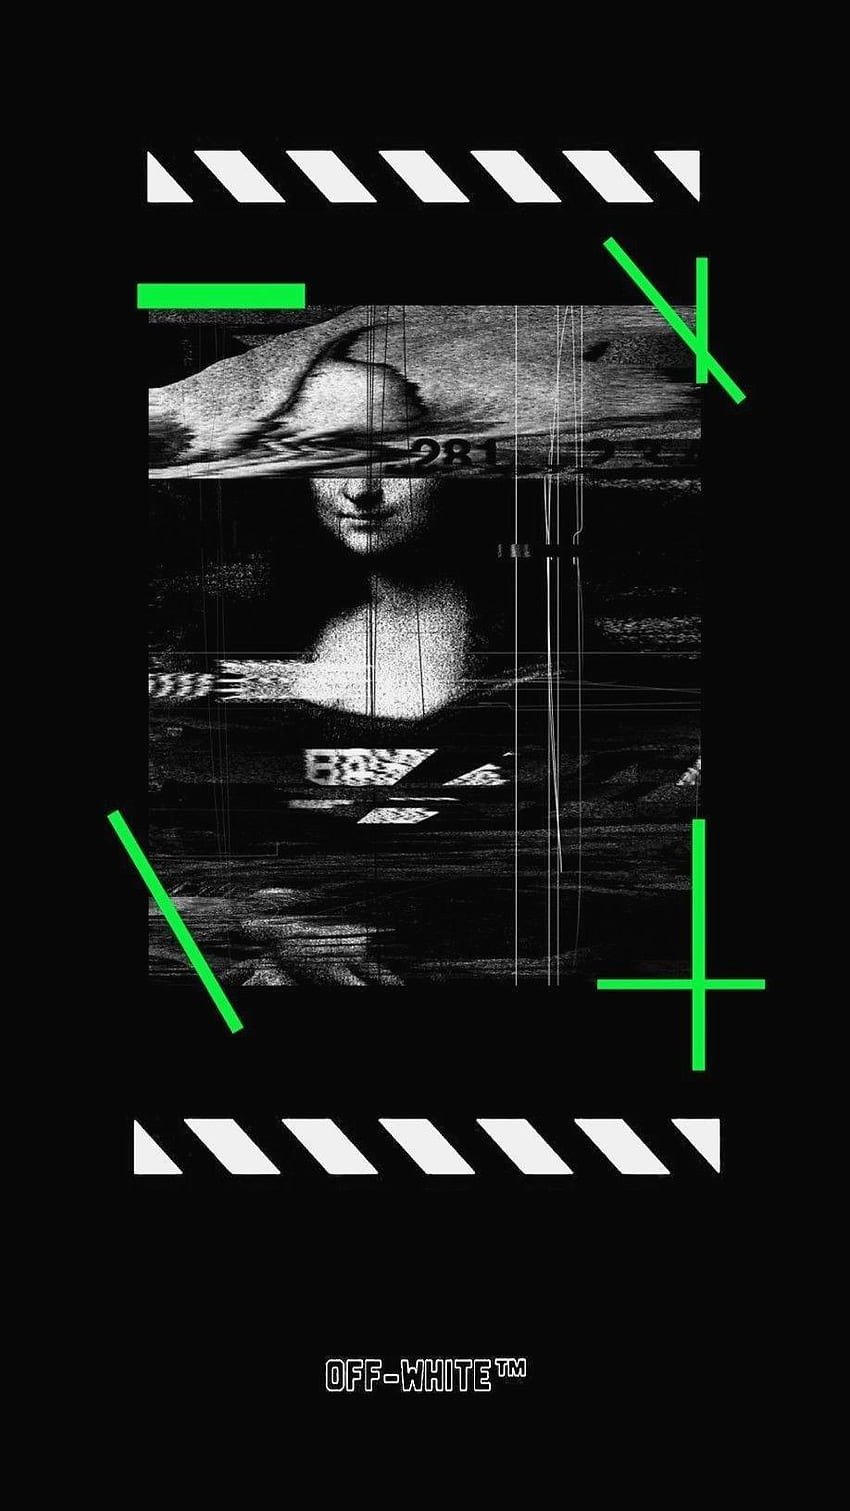 Off-White iPhone Wallpaper by BLCKMVIC ™